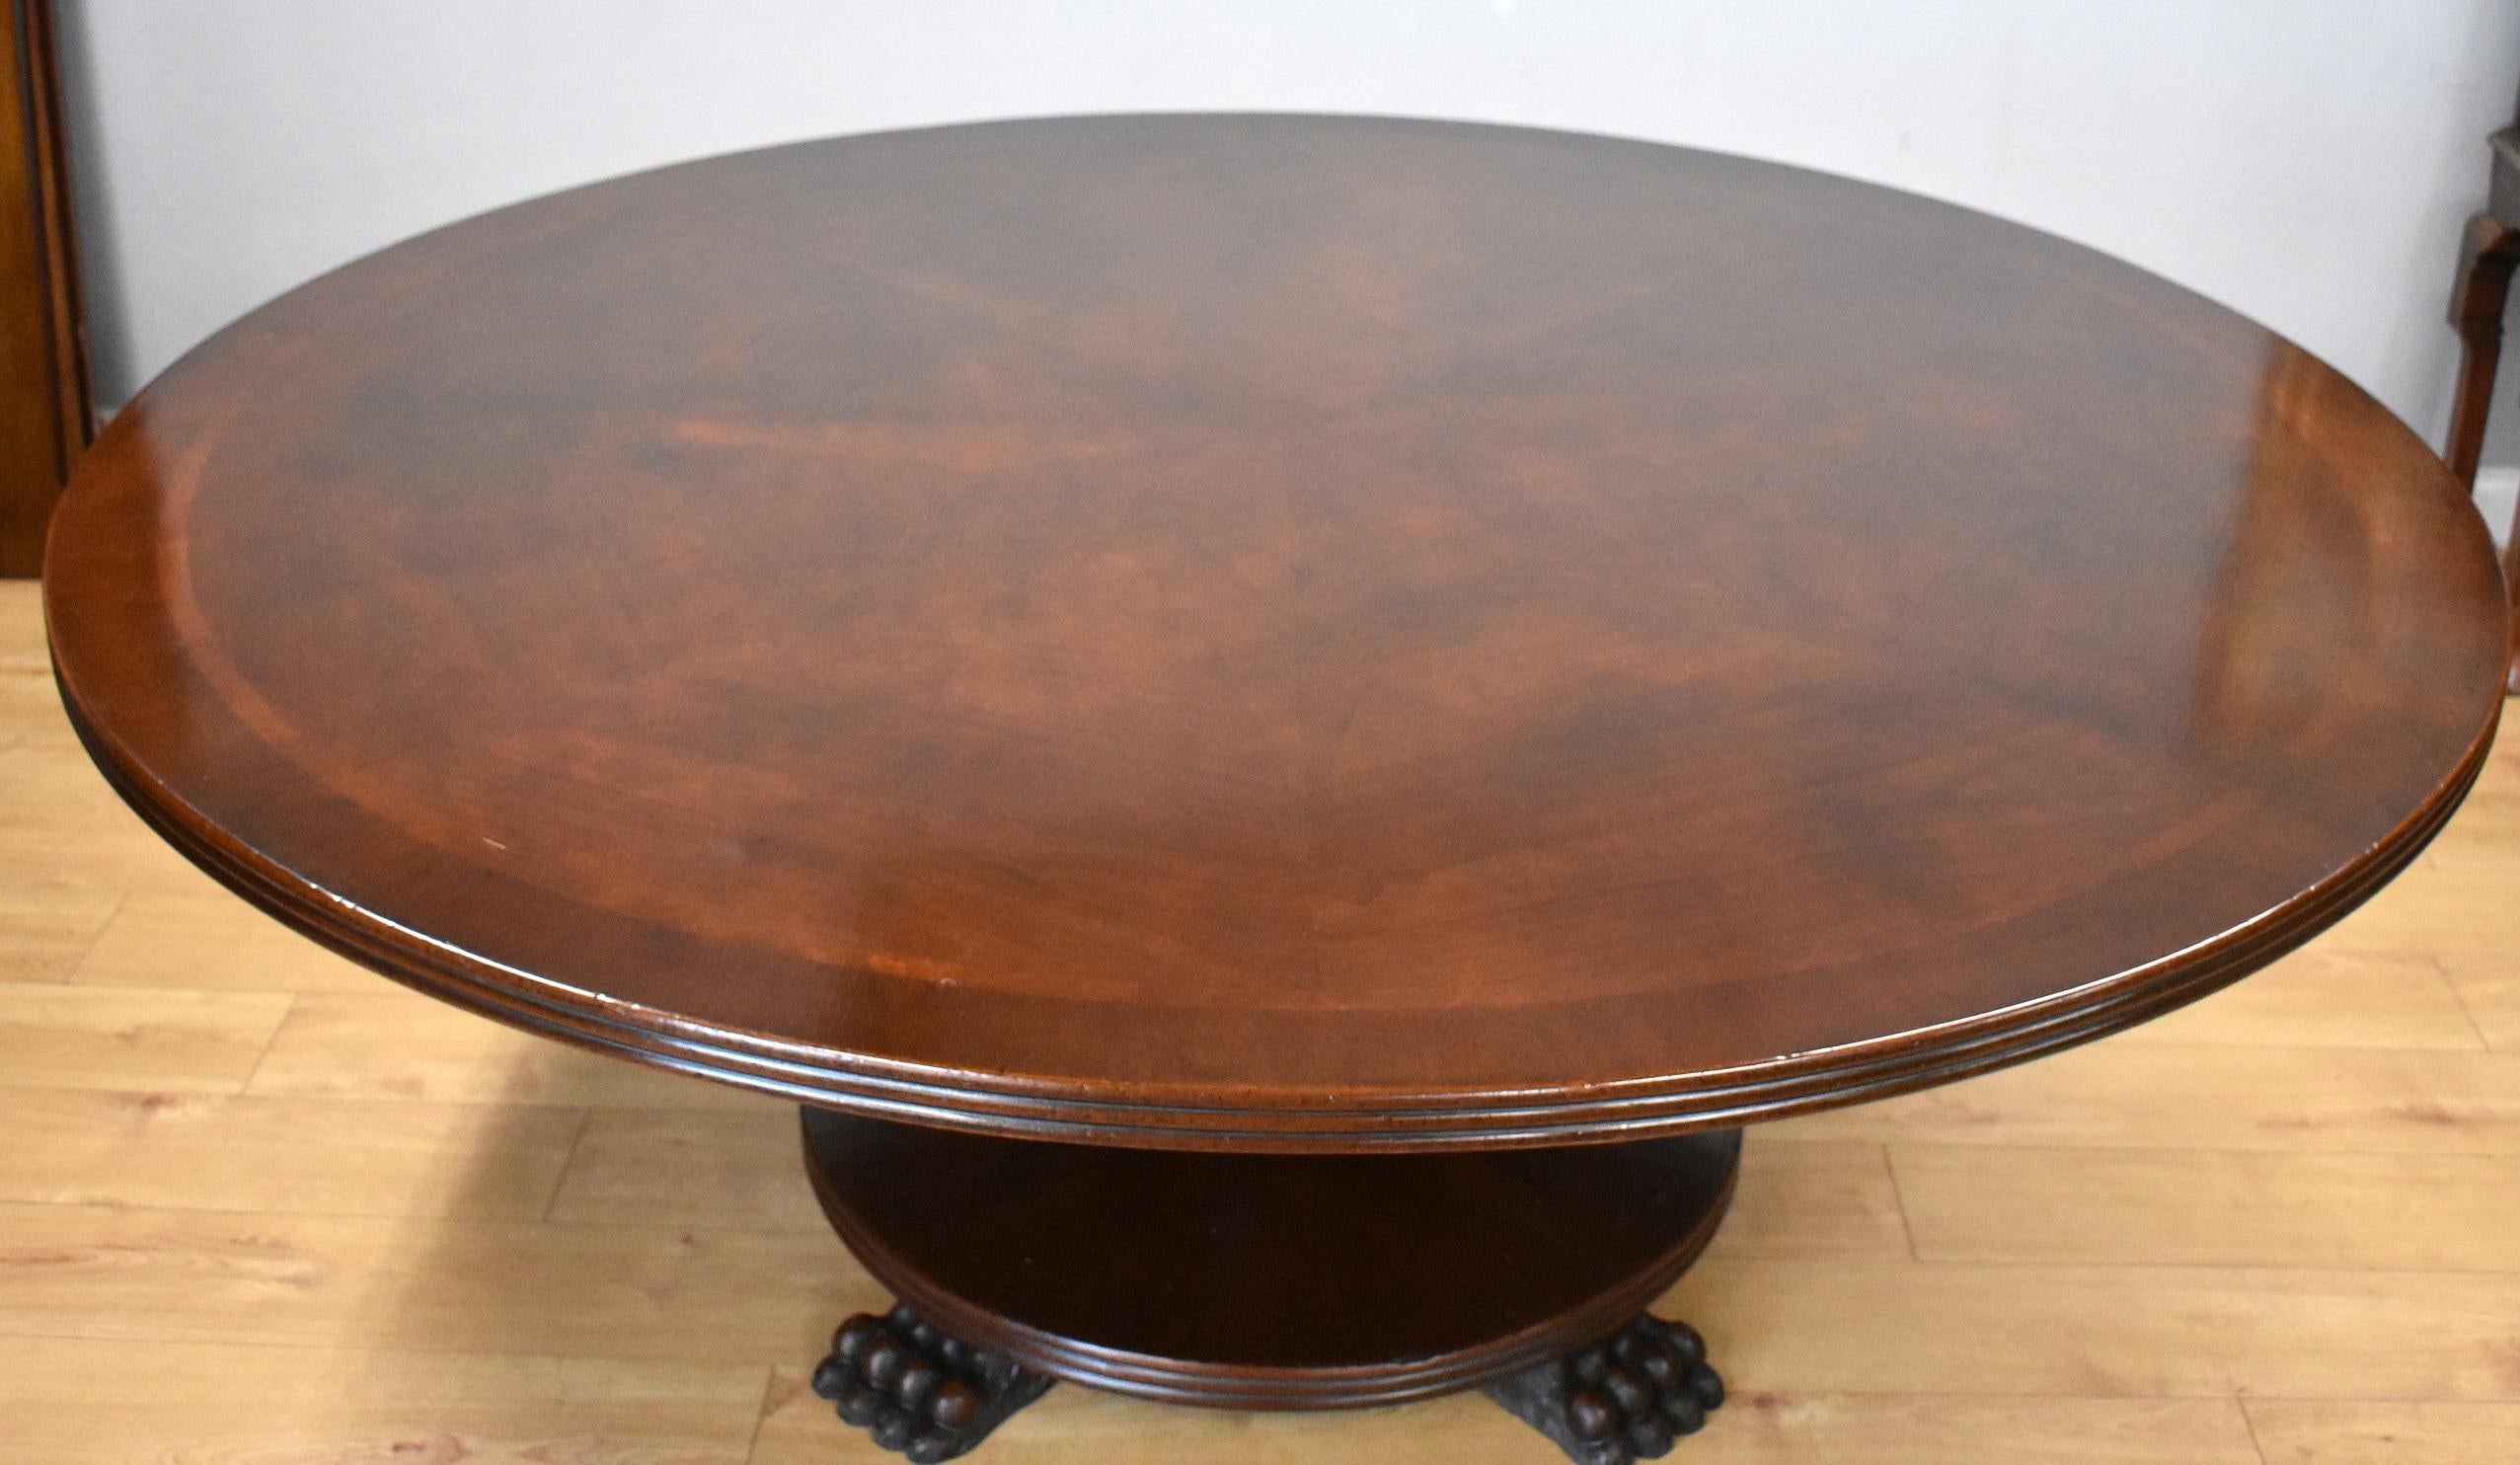 Large Regency style mahogany circular dining table with radial veneers to the top with starburst figured mahogany to the centre. The table stands on a turned column with circular base with large paw feet. Would seat 8 comfortably.